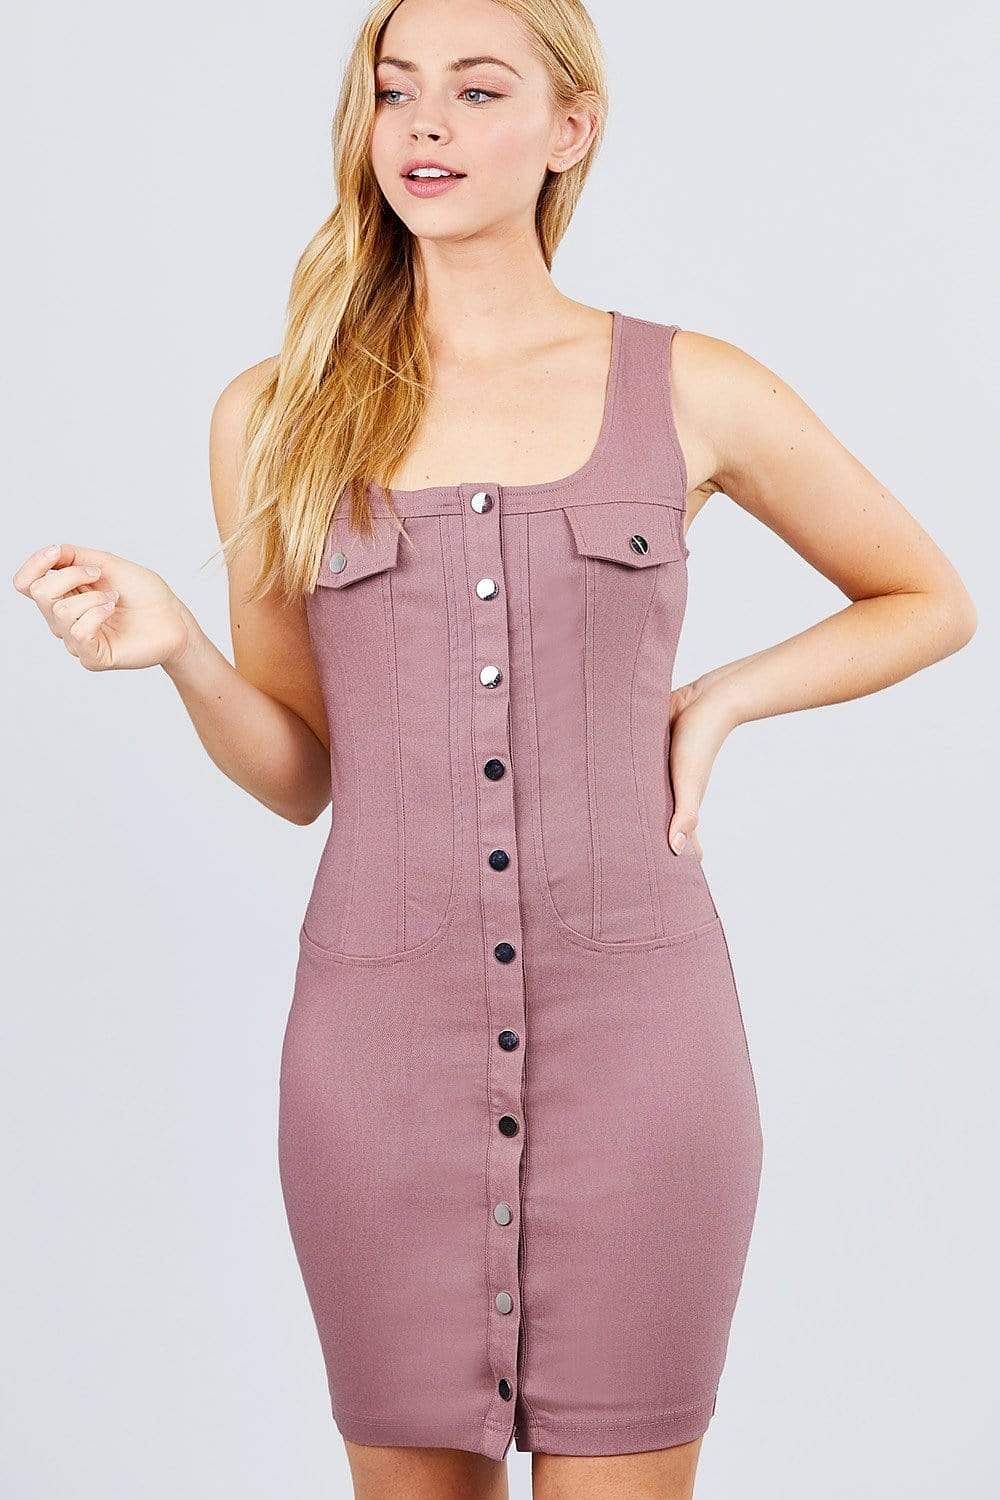 Mauve Sleeveless Mini Dress With Front Buttons - Shopping Therapy S Dress